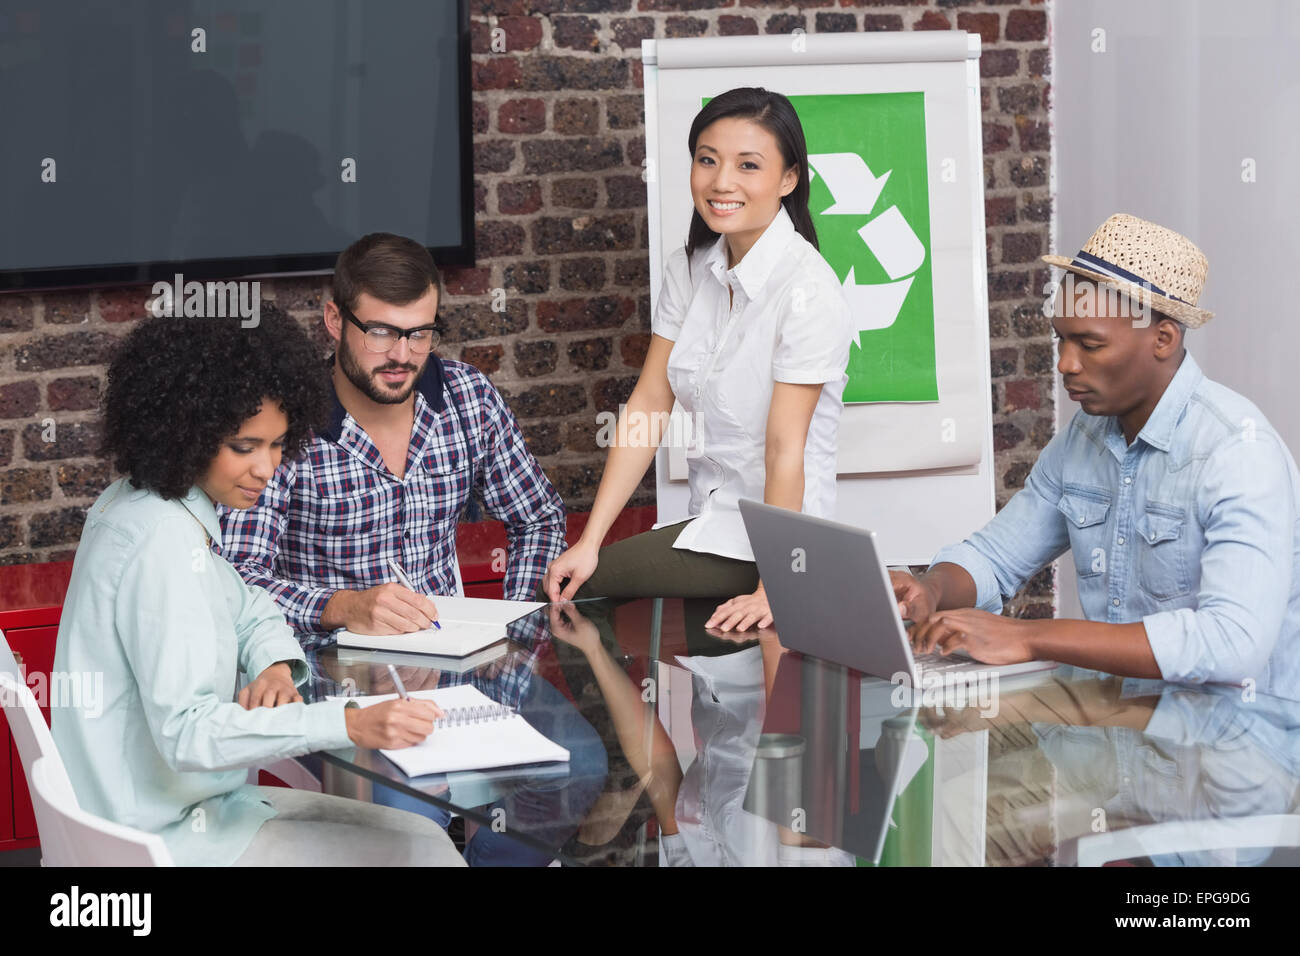 Team in meeting with recycling symbol on whiteboard Stock Photo